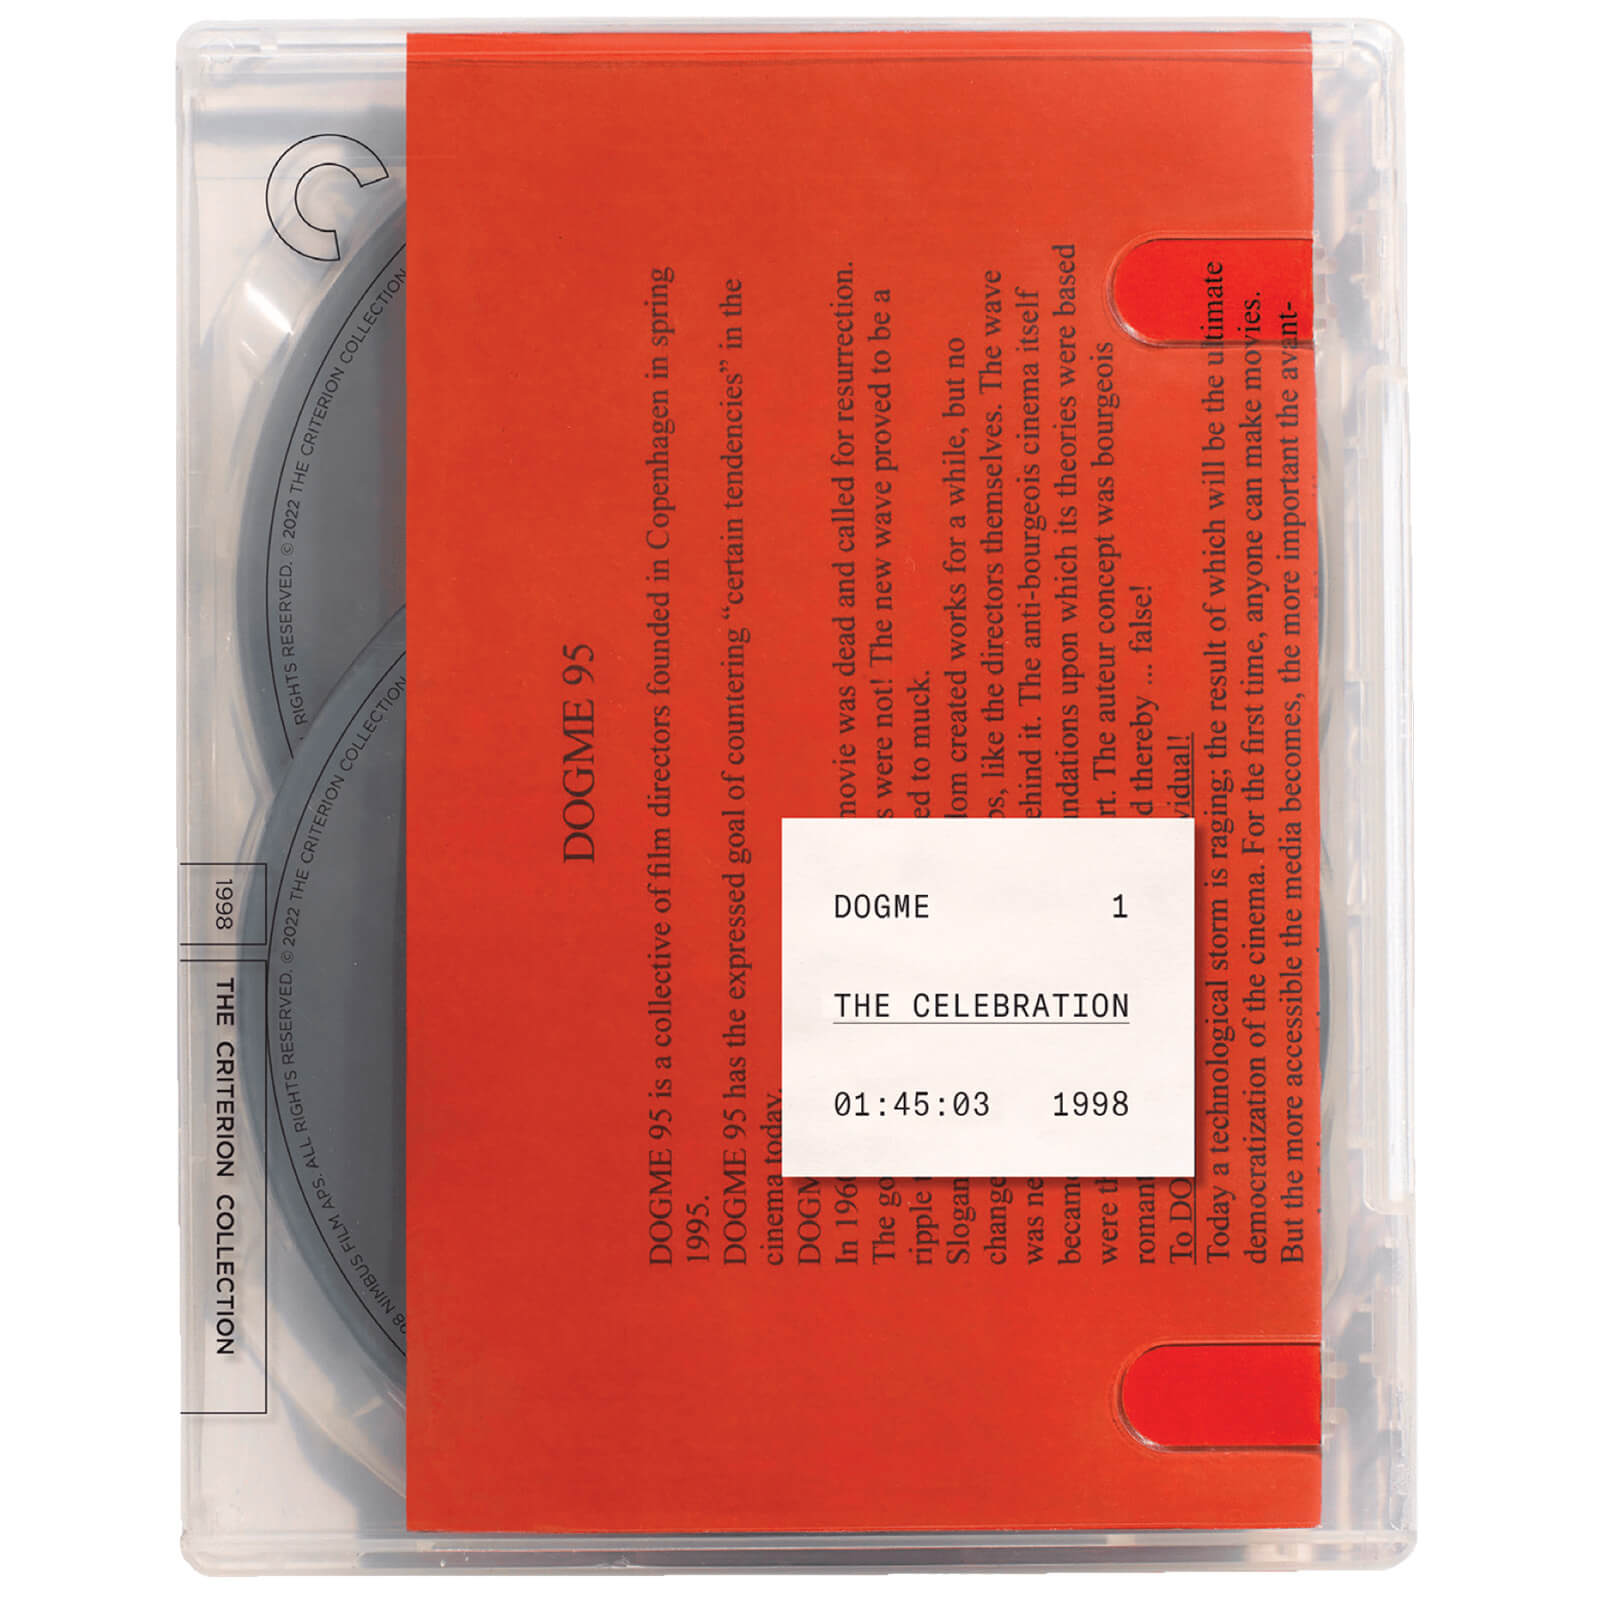 The Celebration - The Criterion Collection (US Import)